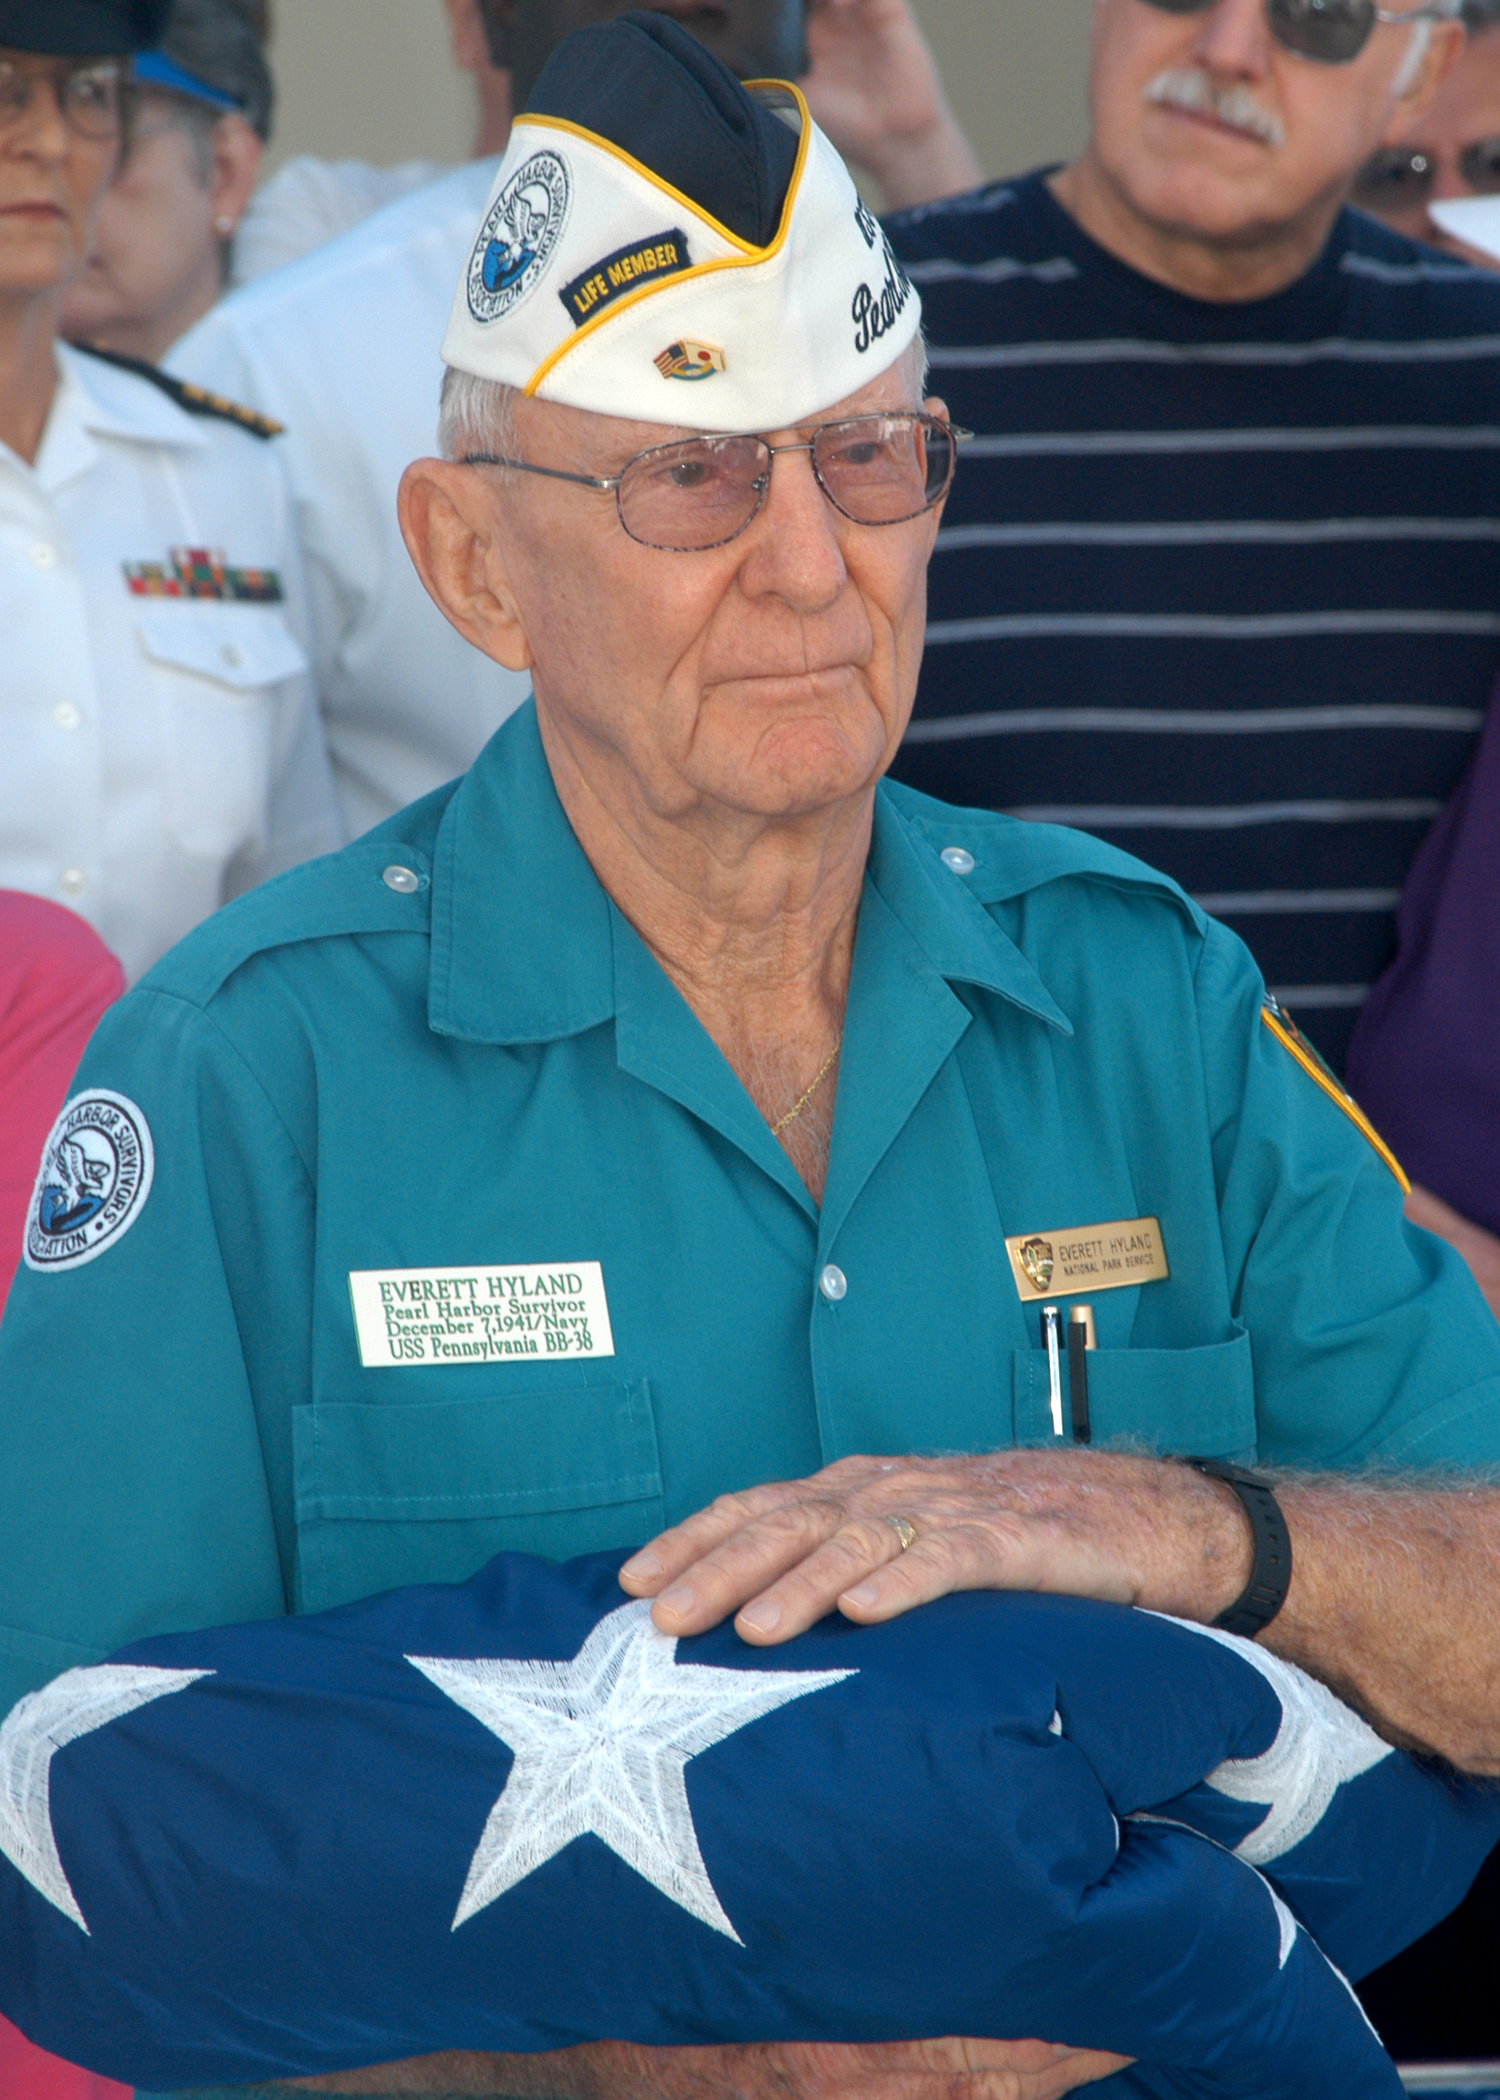 US Navy 031204-N-7391W-045 verett Hyland, the only remaining Pearl Harbor survivor who served aboard the battleship USS Pennsylvania